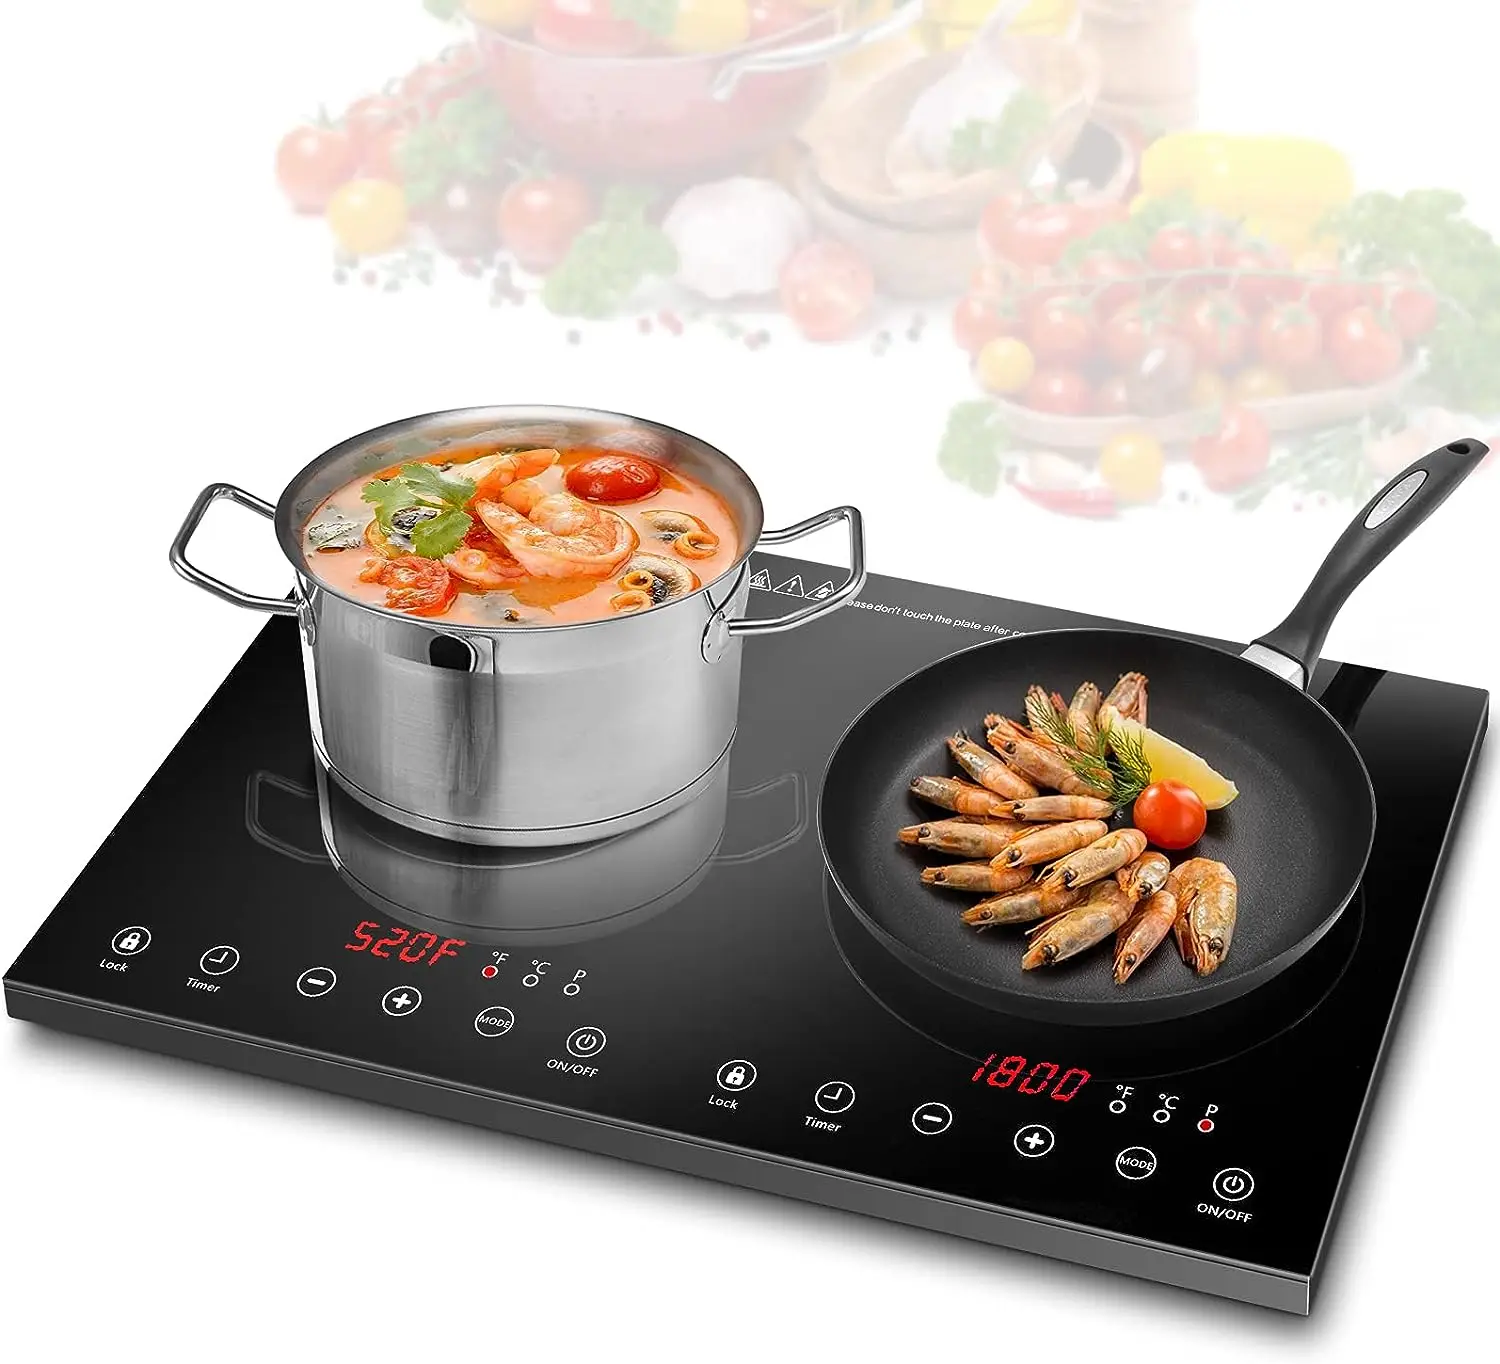 

Induction Cooktop, 1800W Cooktop with 2 Burner, Portable Countertop Burner with LED Sensor Touch Screen, 17 Power Levels 21 Tem